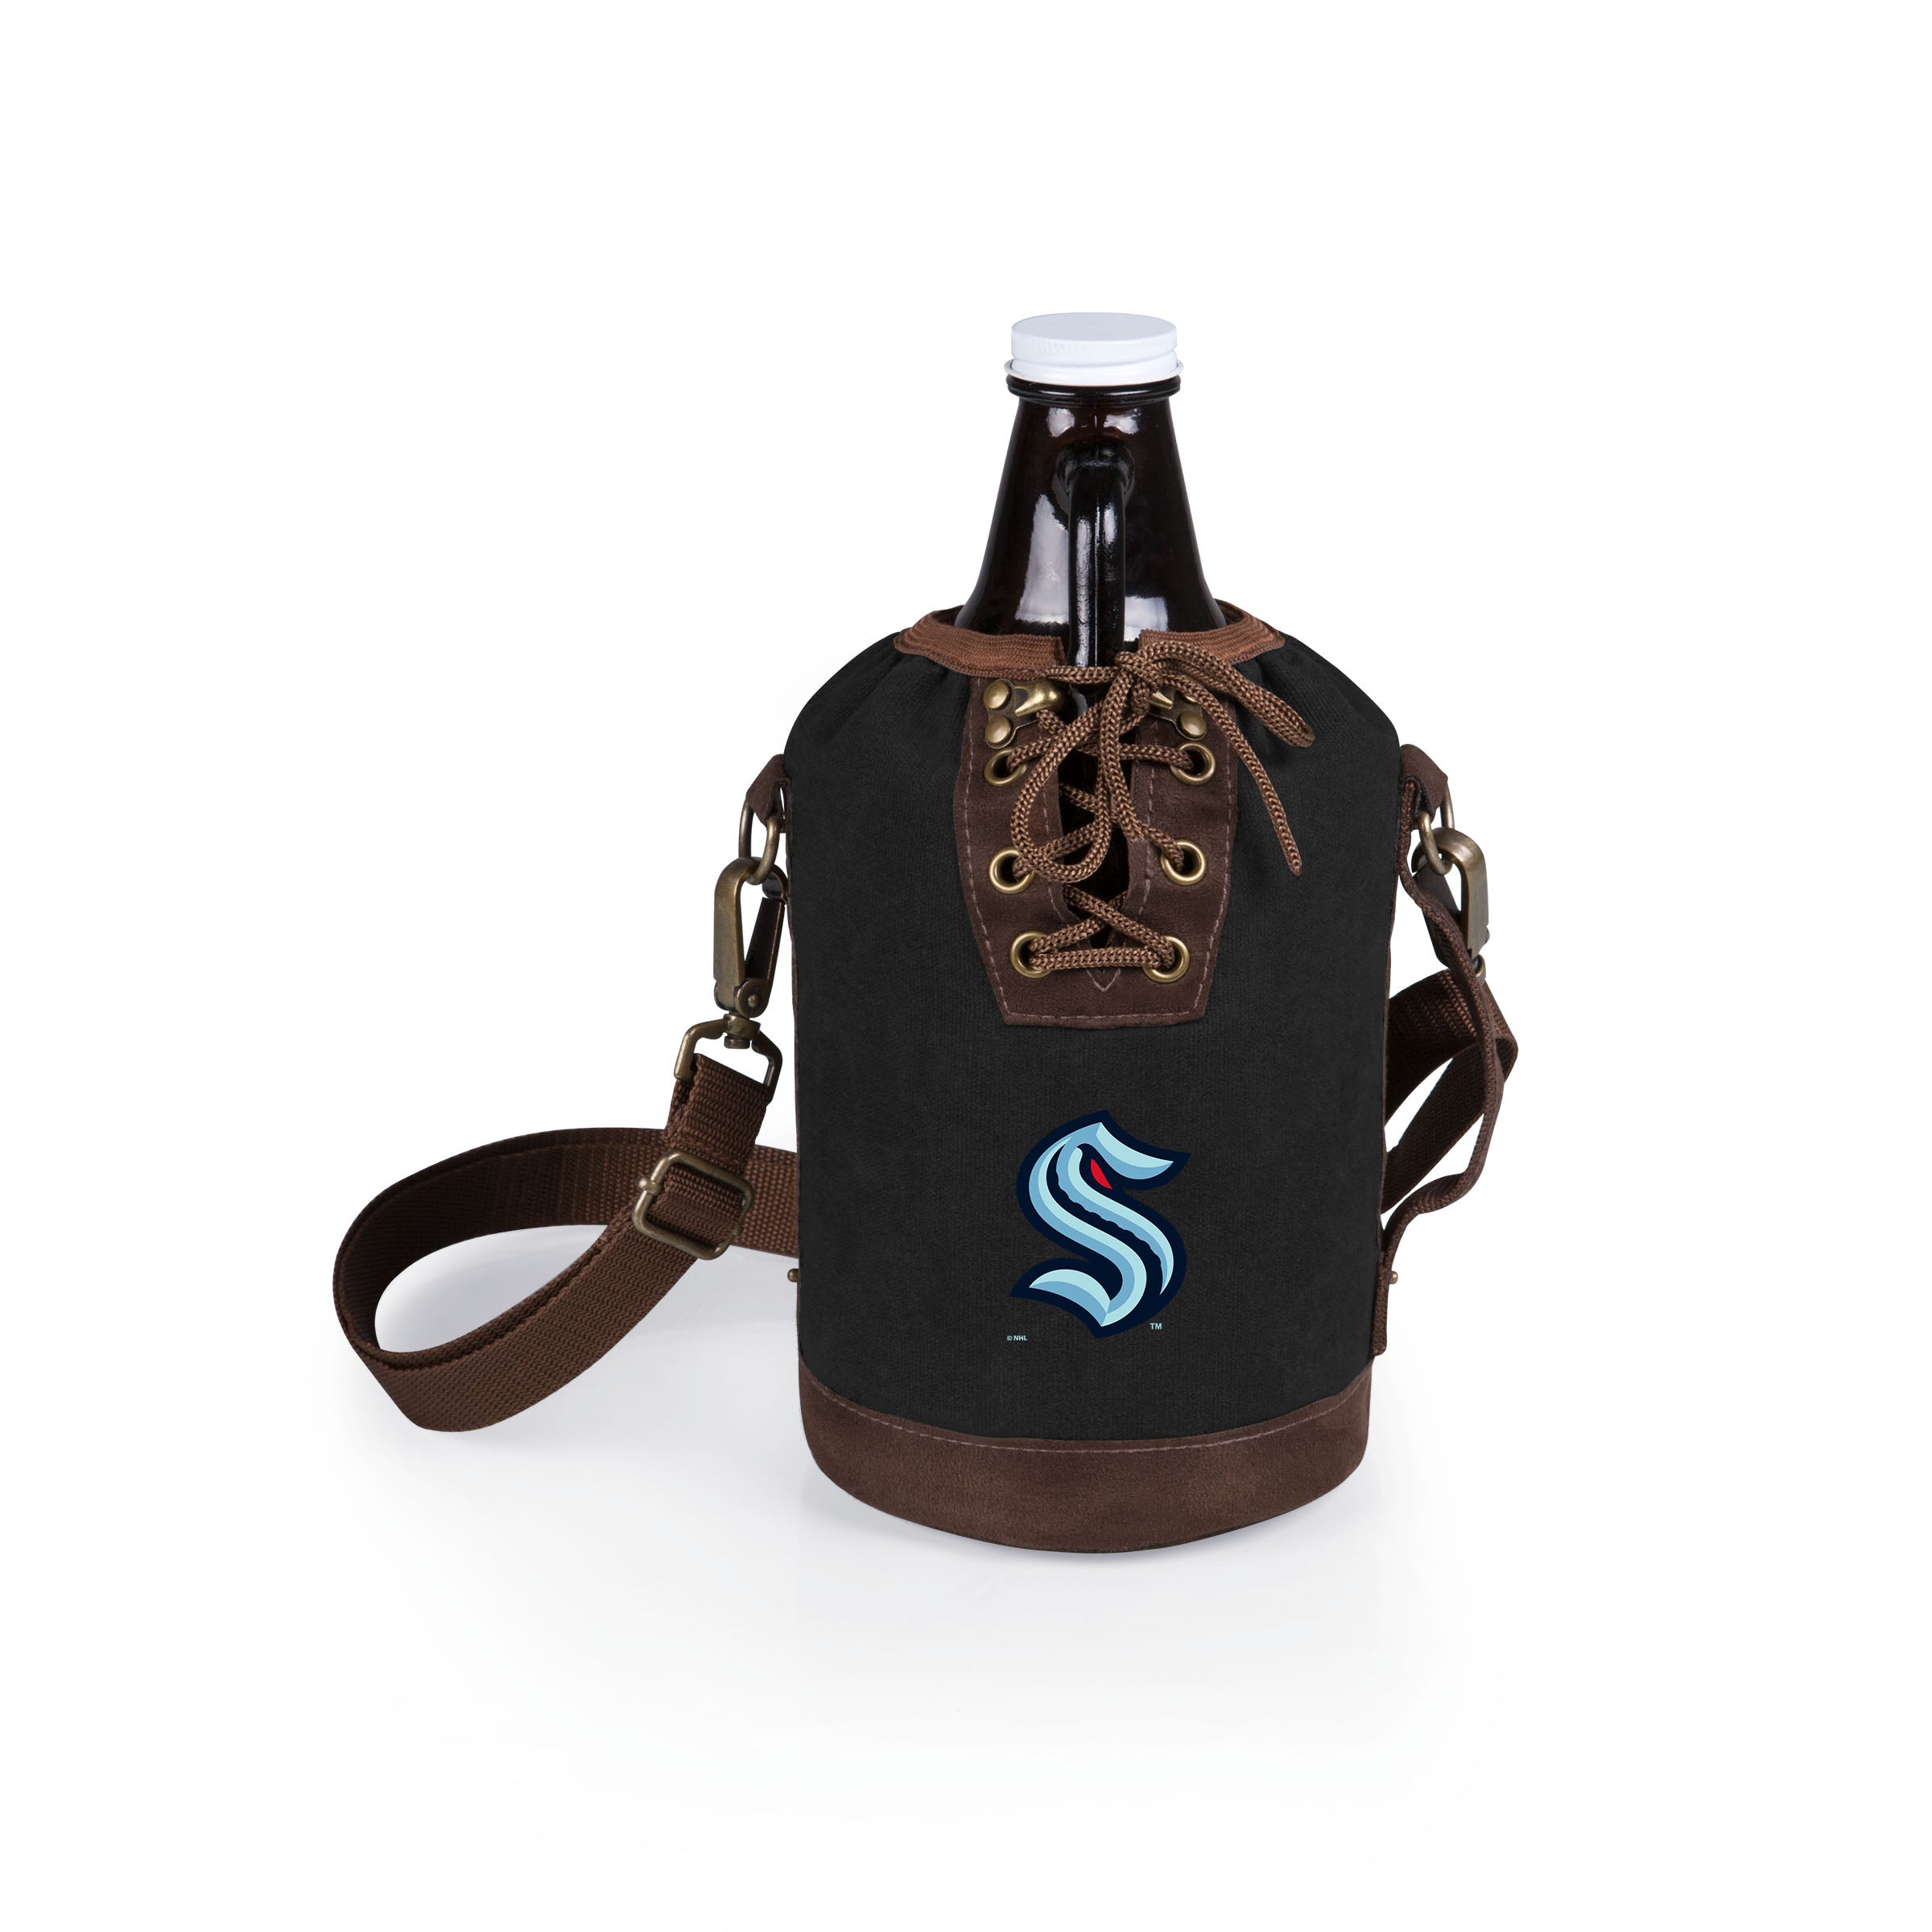 Seattle Kraken - Insulated Growler Tote with 64 oz. Glass Growler